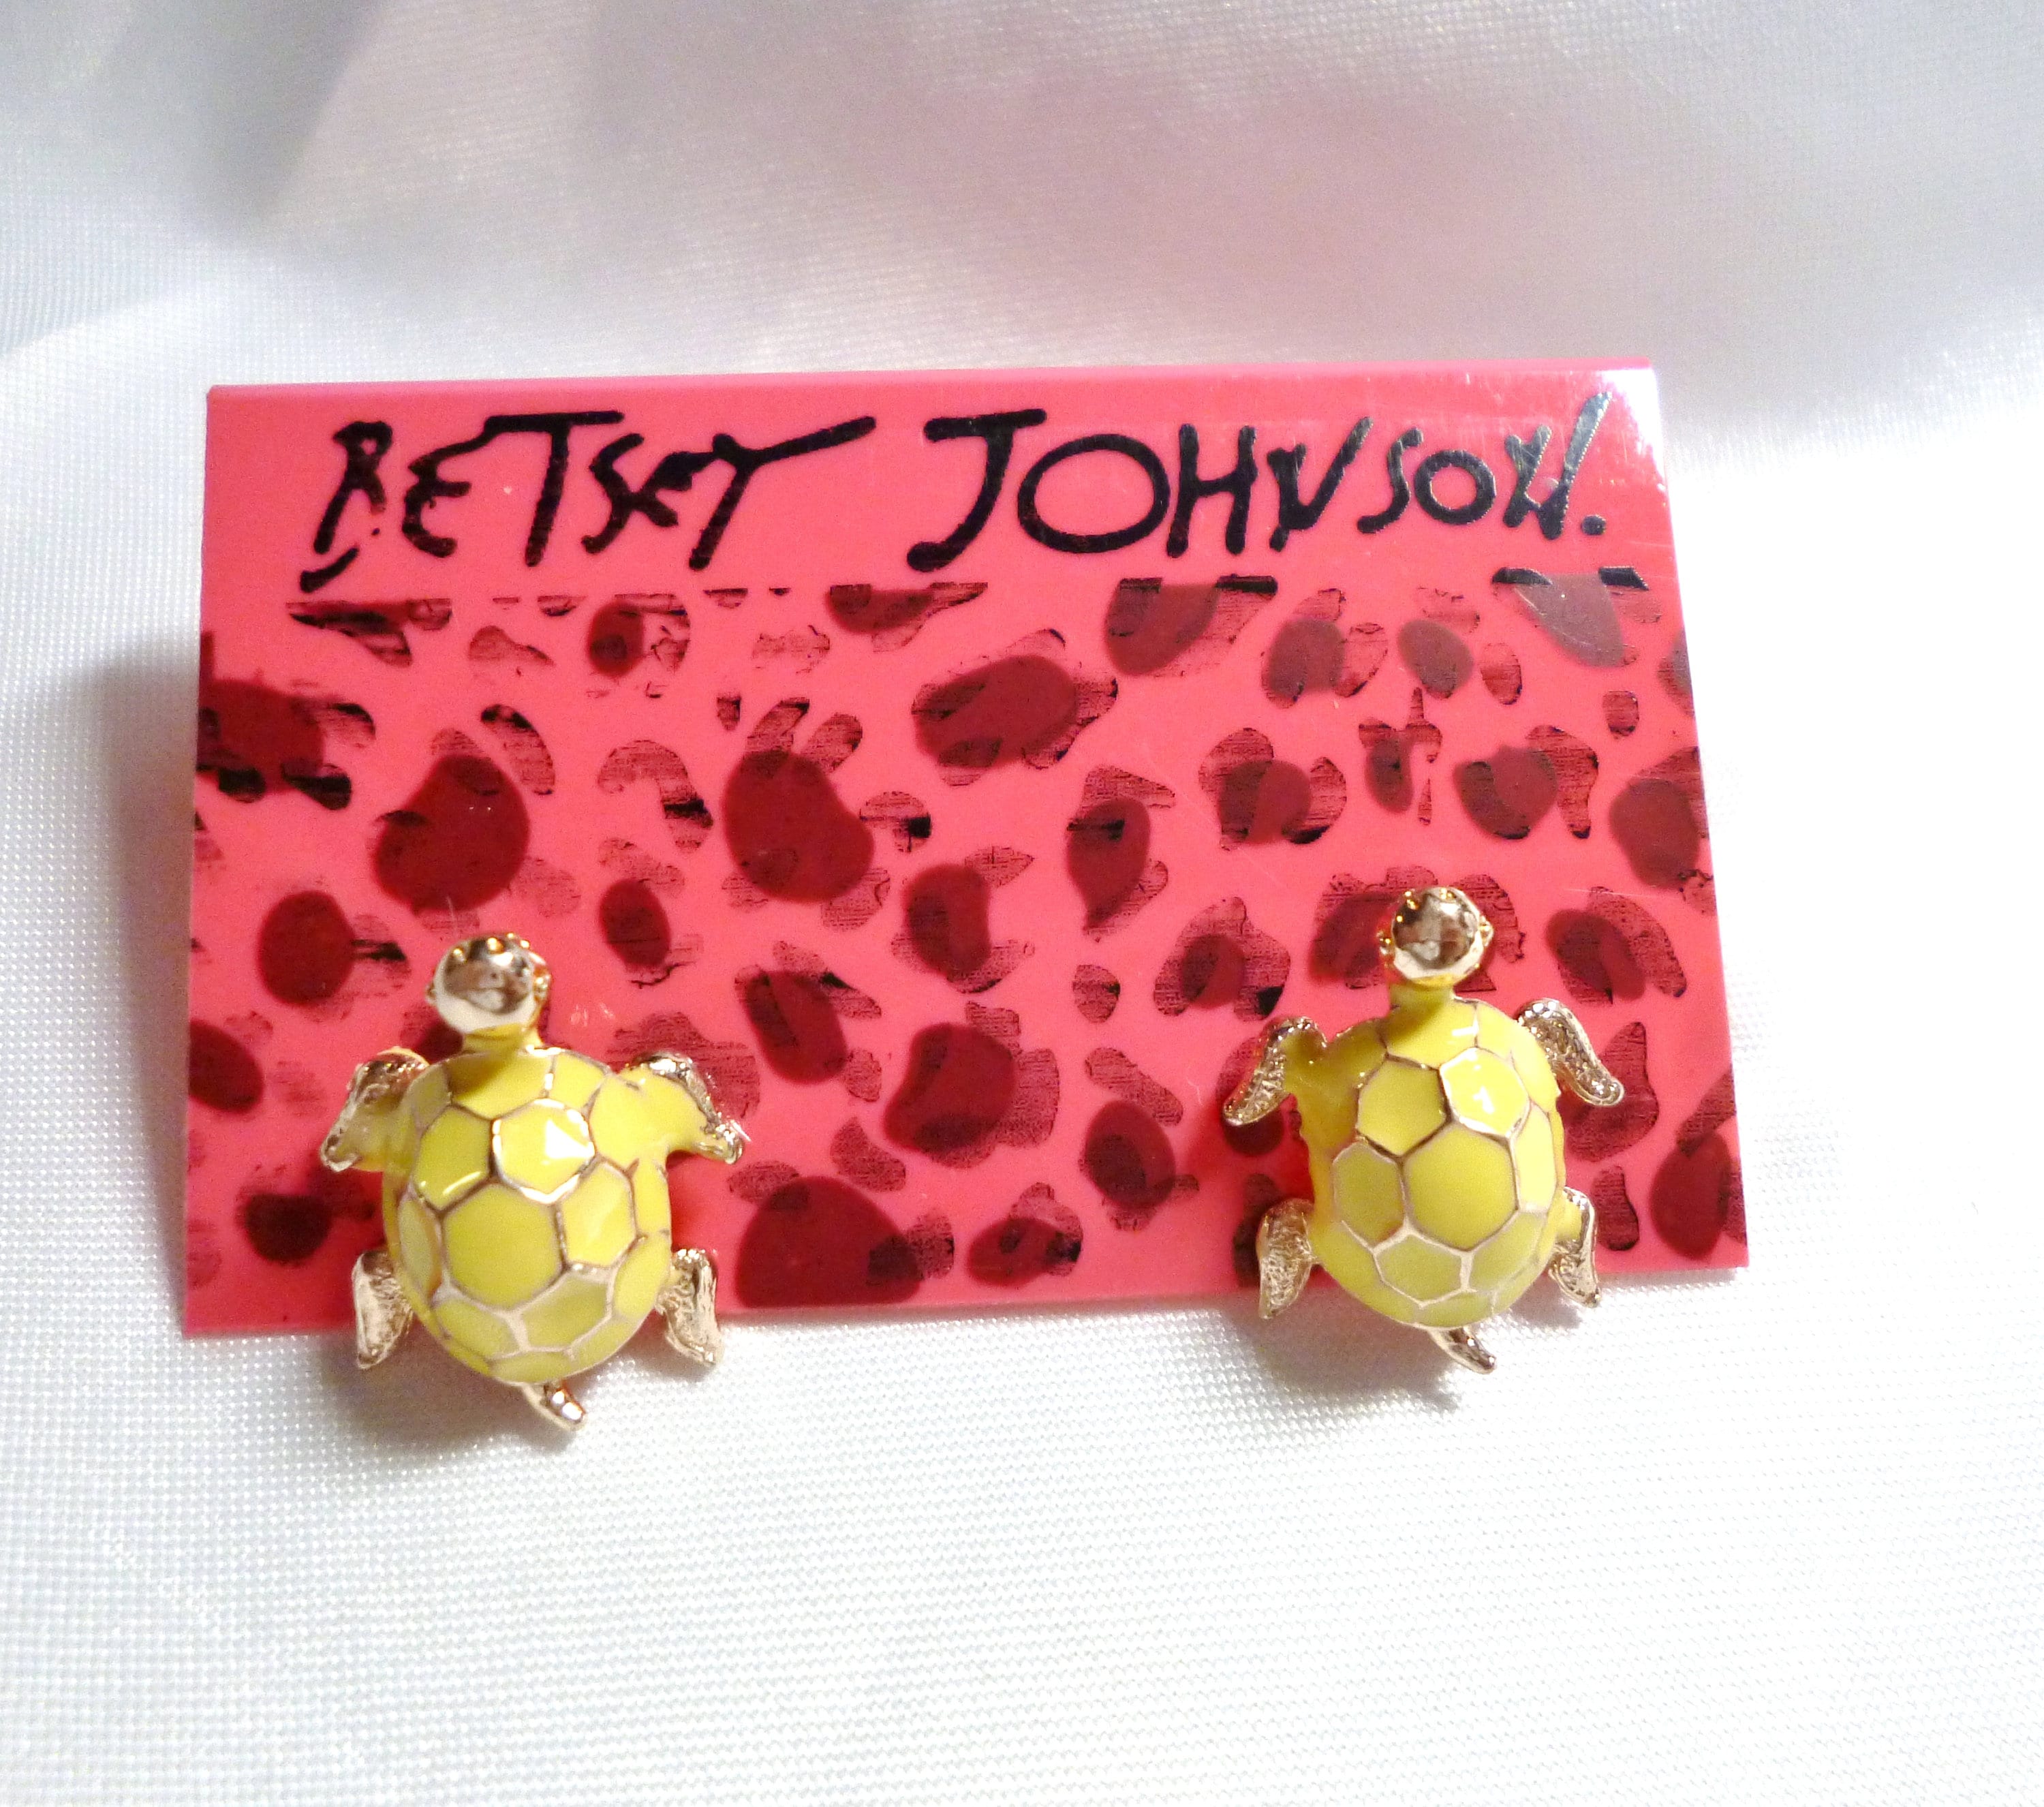 Betsey Johnson Stud Earrings: 1 customer review and 20 listings